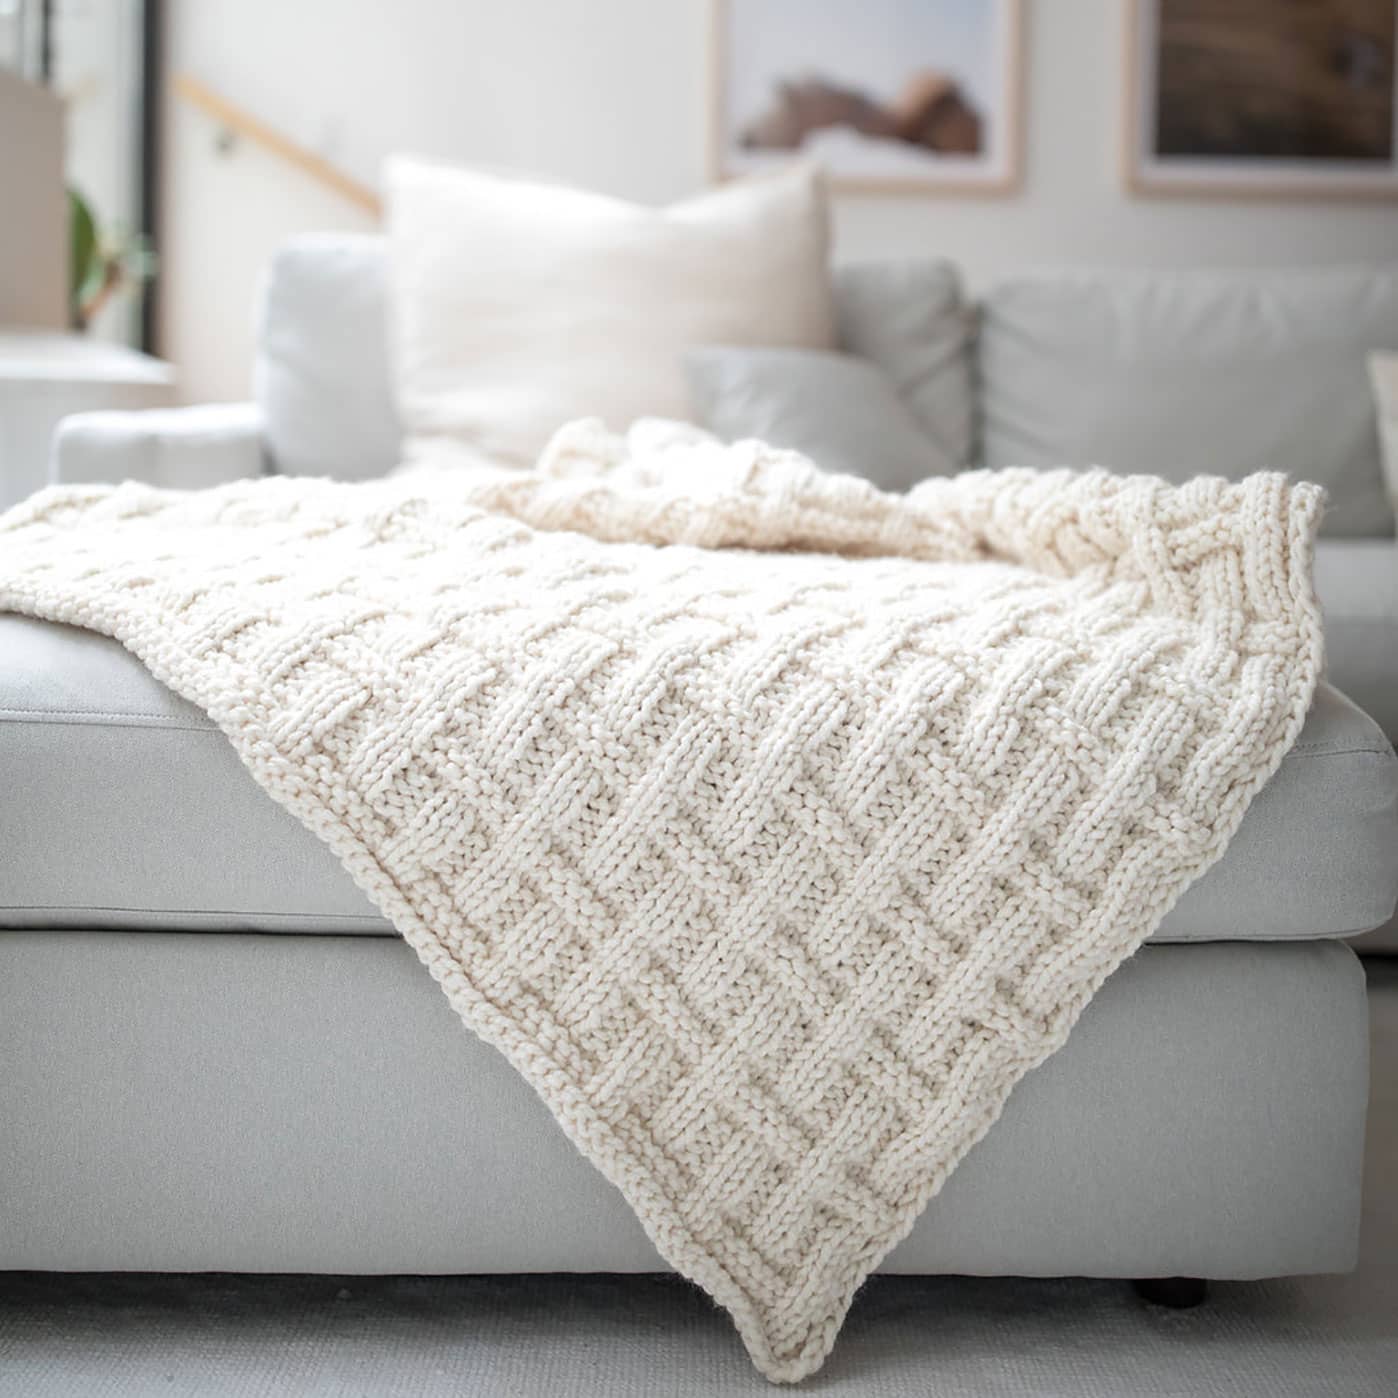 How To Make A Wool-Ease Thick & Quick Simple Striped Afghan